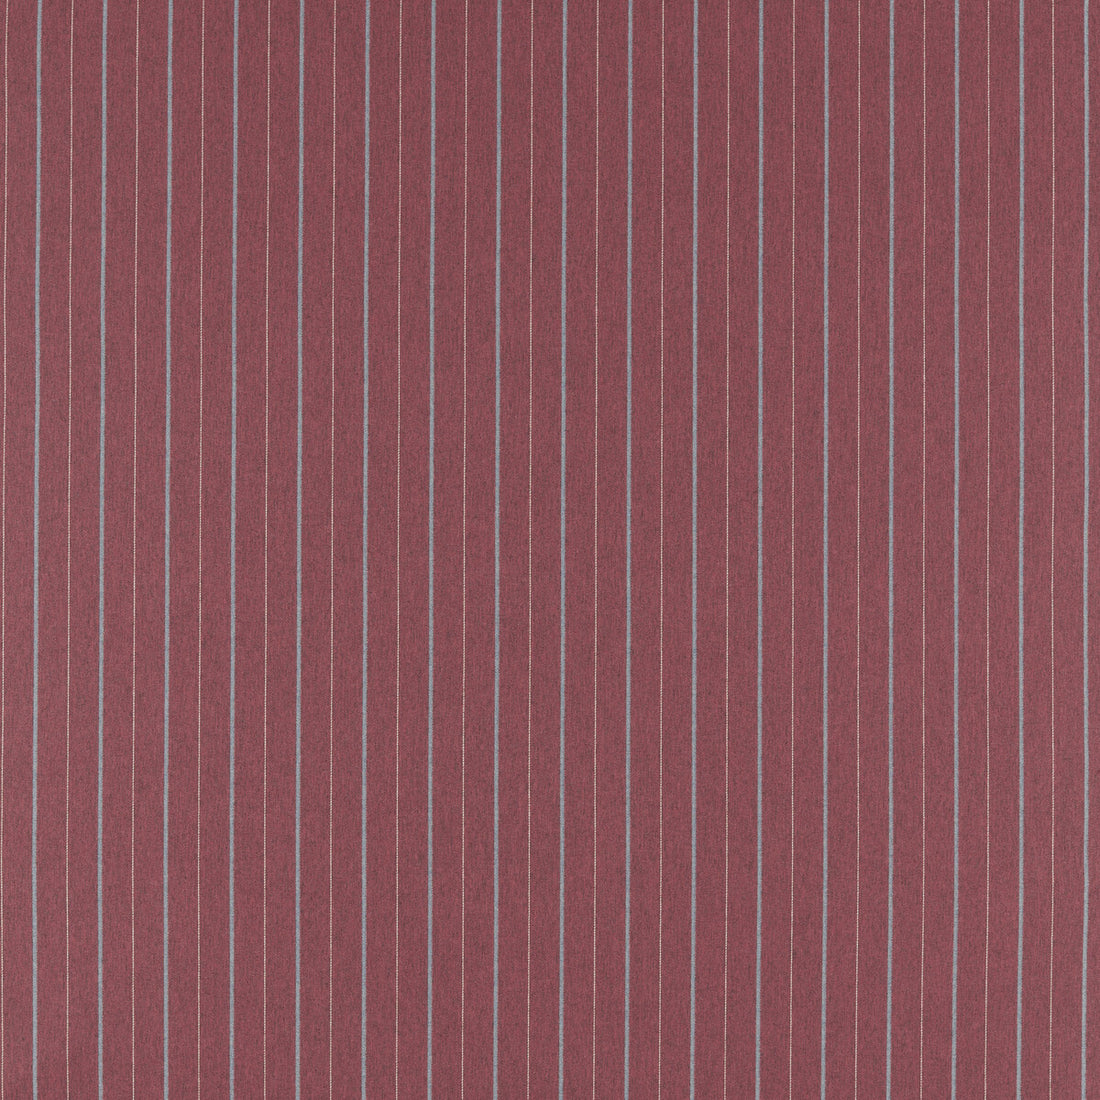 Bowmont fabric in cranberry color - pattern F1568/02.CAC.0 - by Clarke And Clarke in the Clarke &amp; Clarke Burlington collection